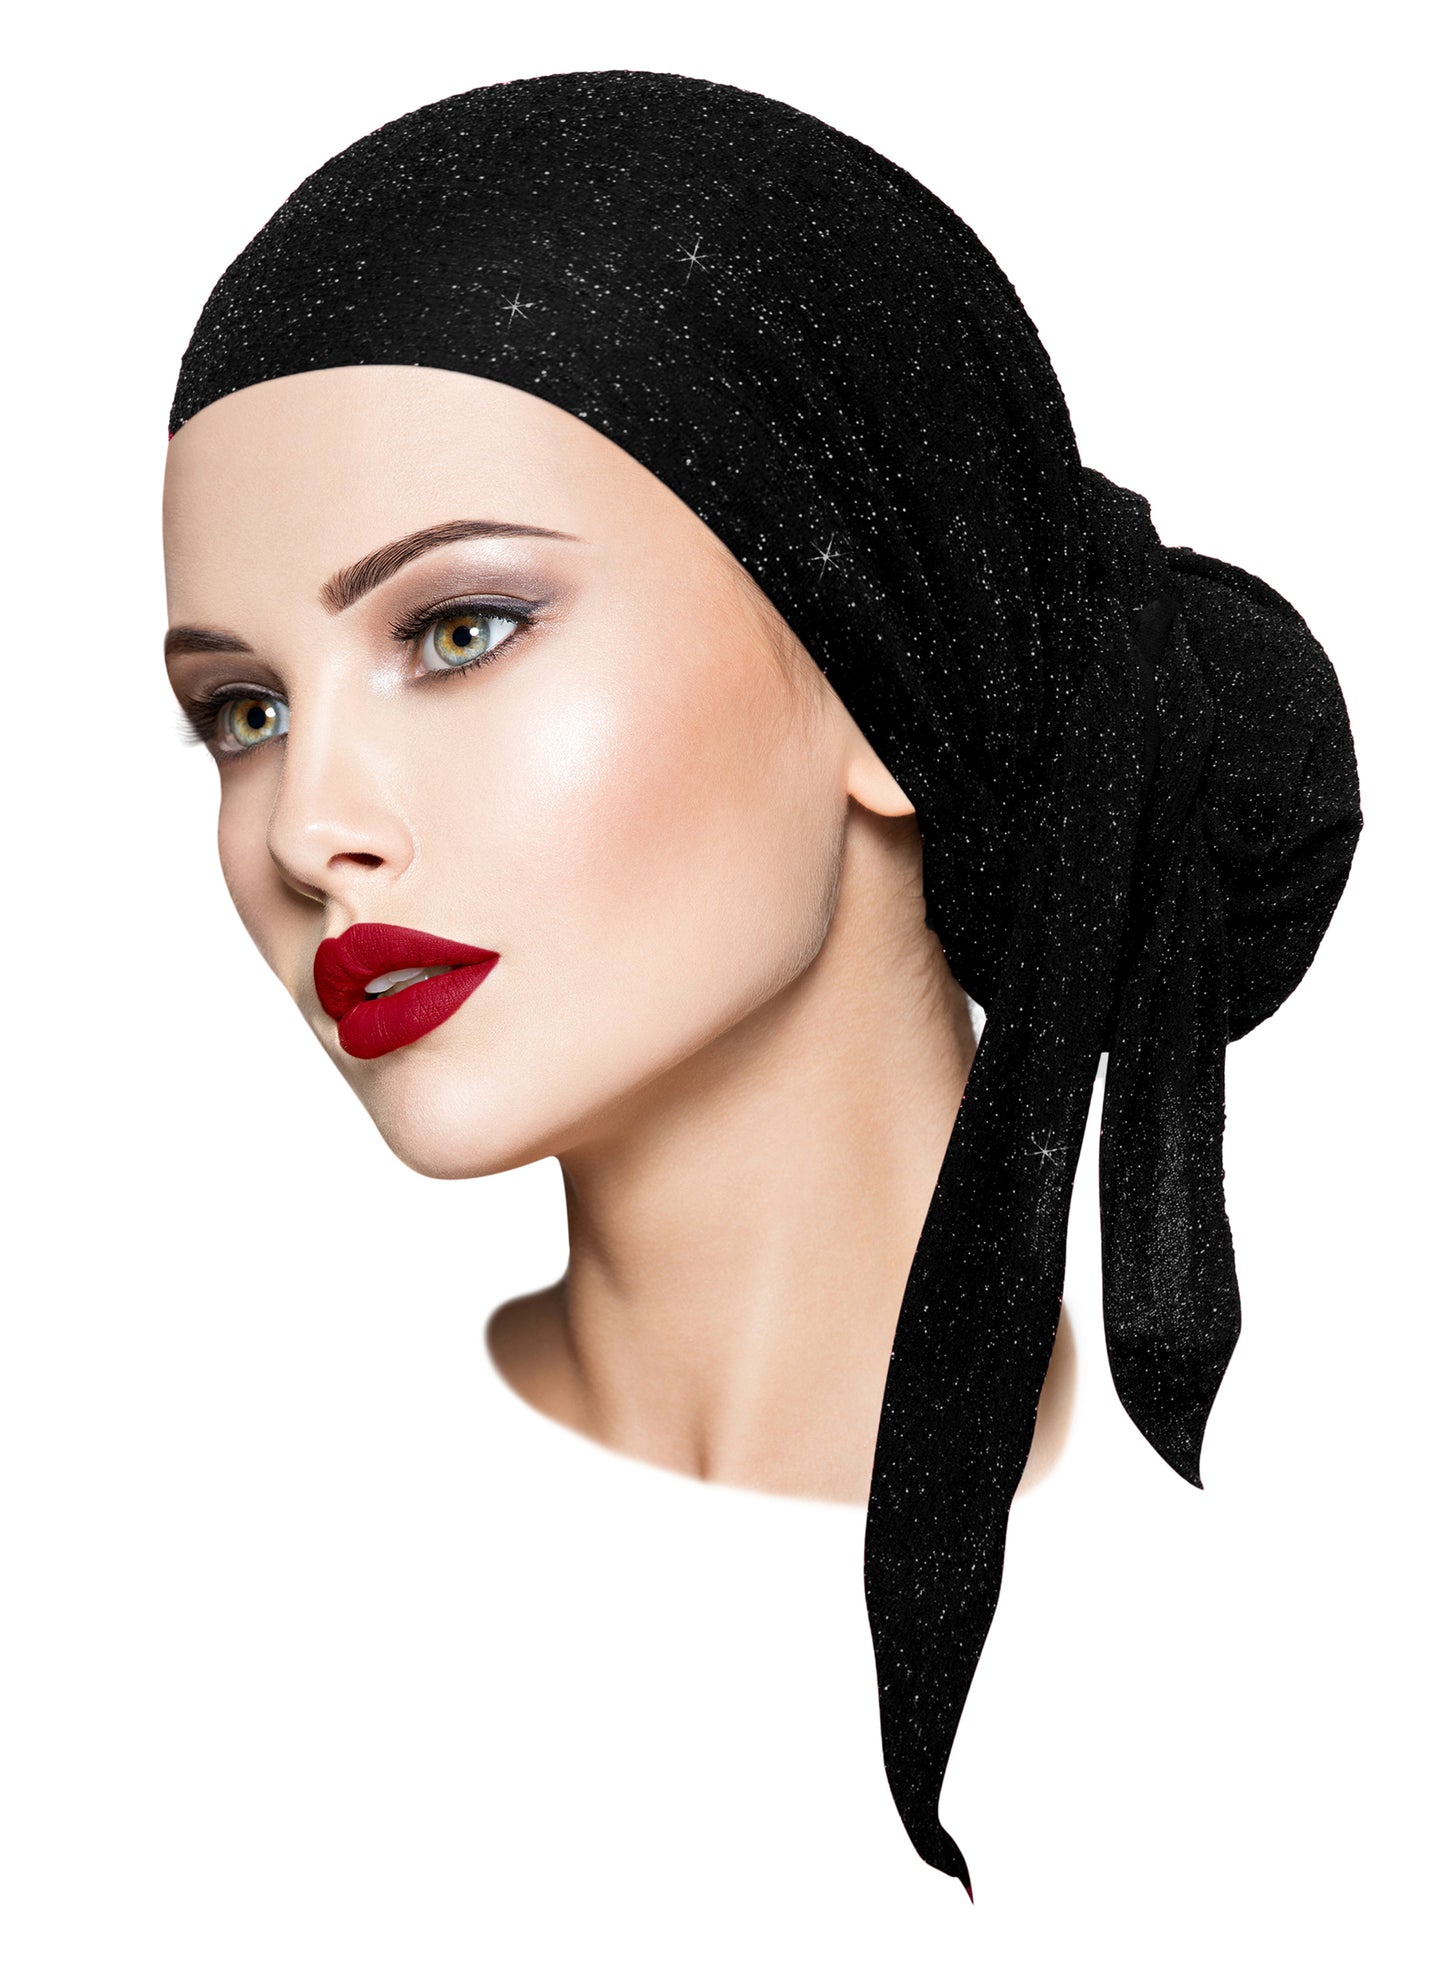 Long black headscarf with sparkles